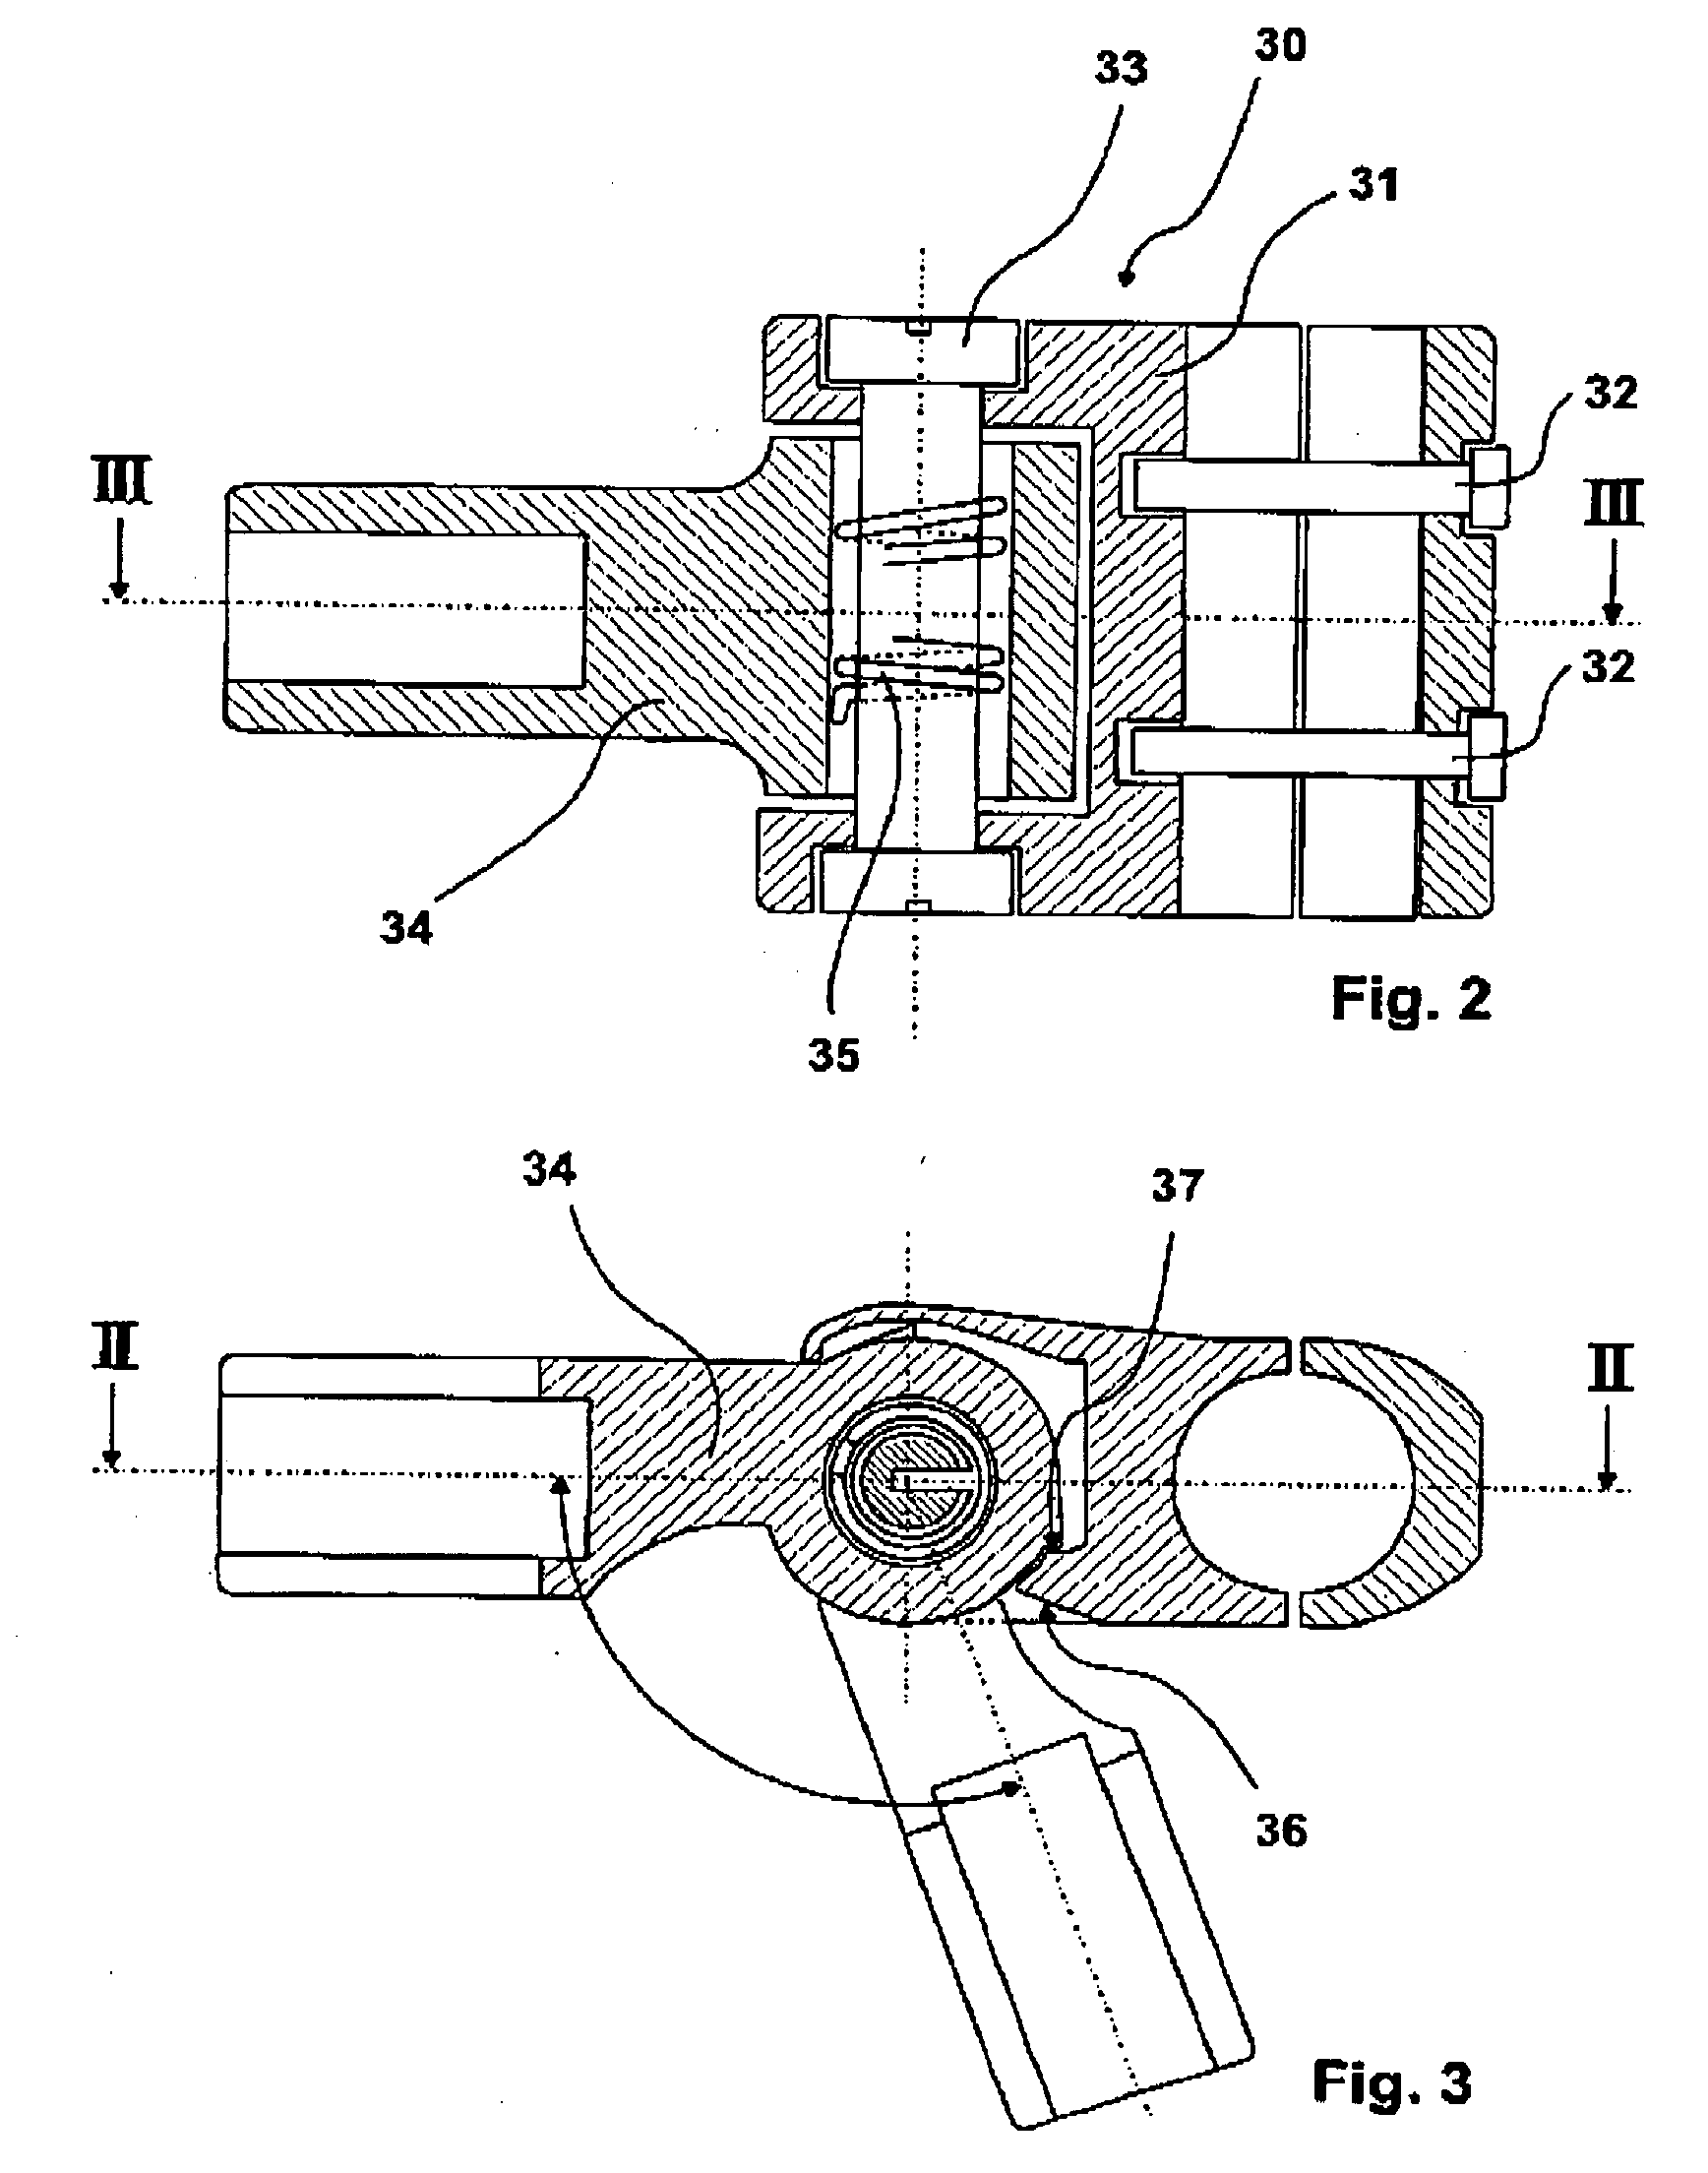 Device for preventing persons from boarding a vehicle, more specifically a bus, through a door opening